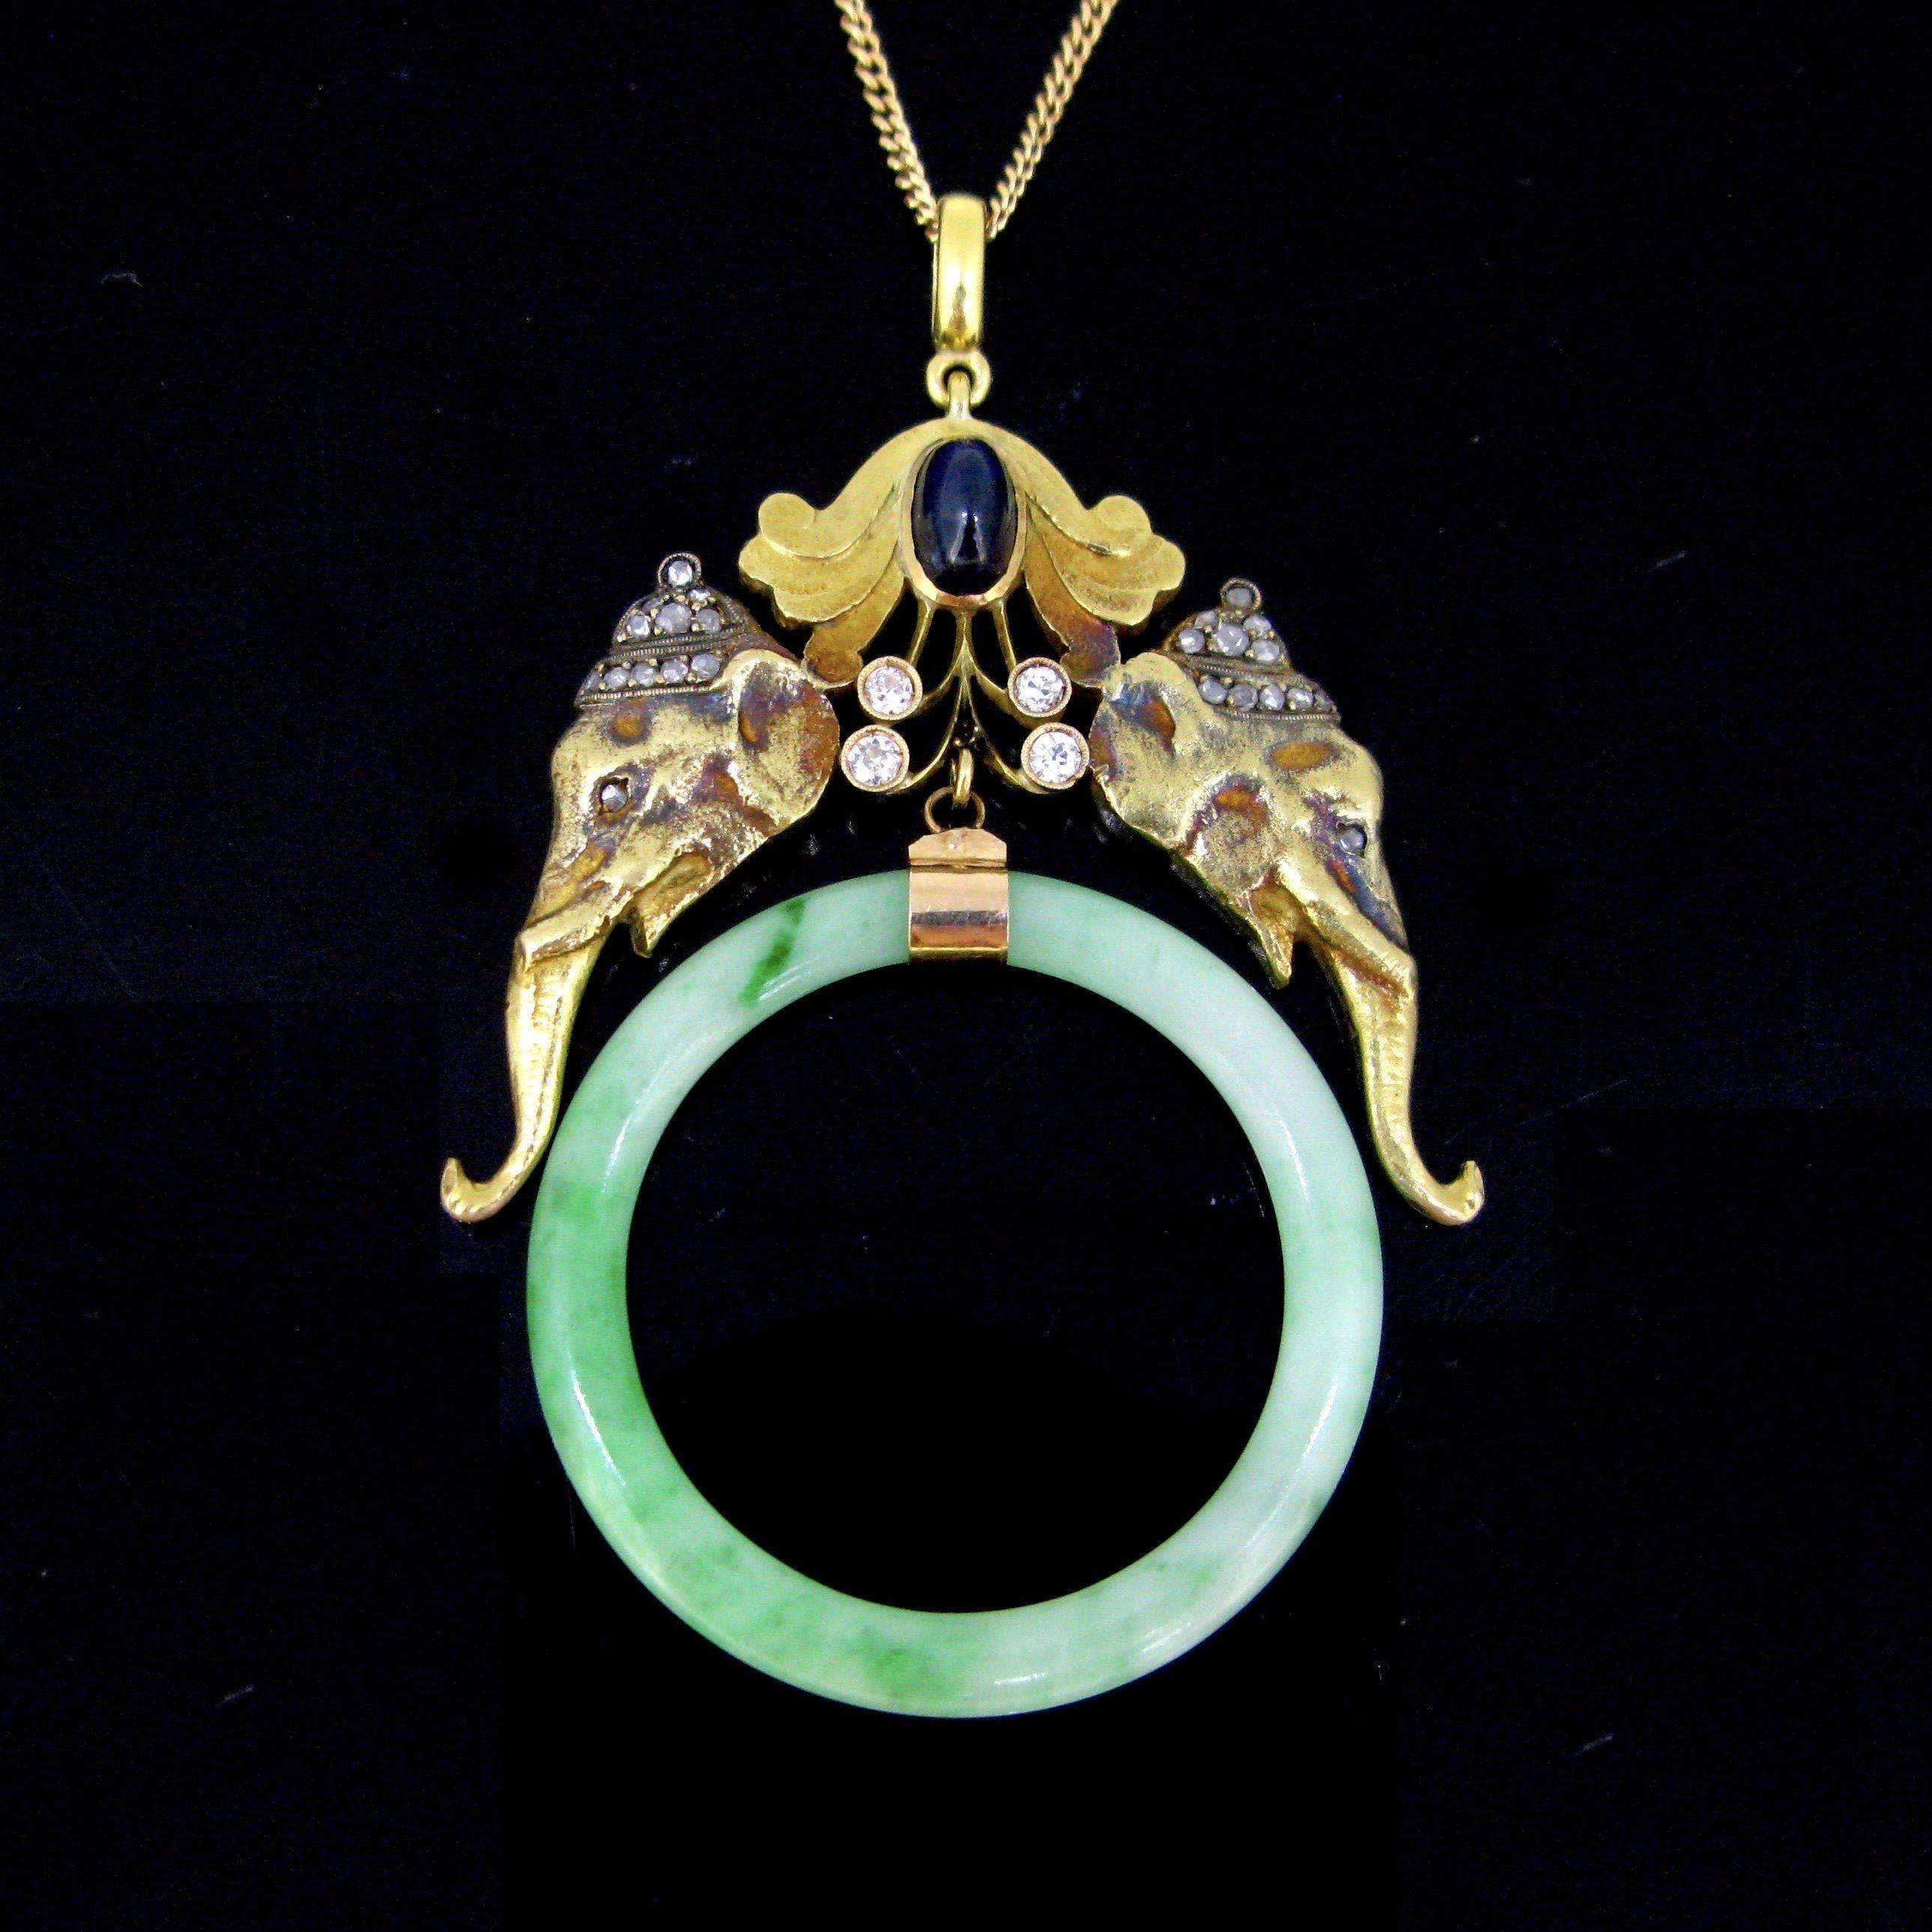 Weight: 22,8gr

Metal: 18kt Yellow Gold

Condition: Very Good

Stones: 1 Sapphire
• Cut: Cabochon
• Weight: 2ct approximately

Others: 28 diamonds (tcw: 0.50ct approximately)
Jadeite jade

Comments: This pretty pendant is fully made in 18kt solid